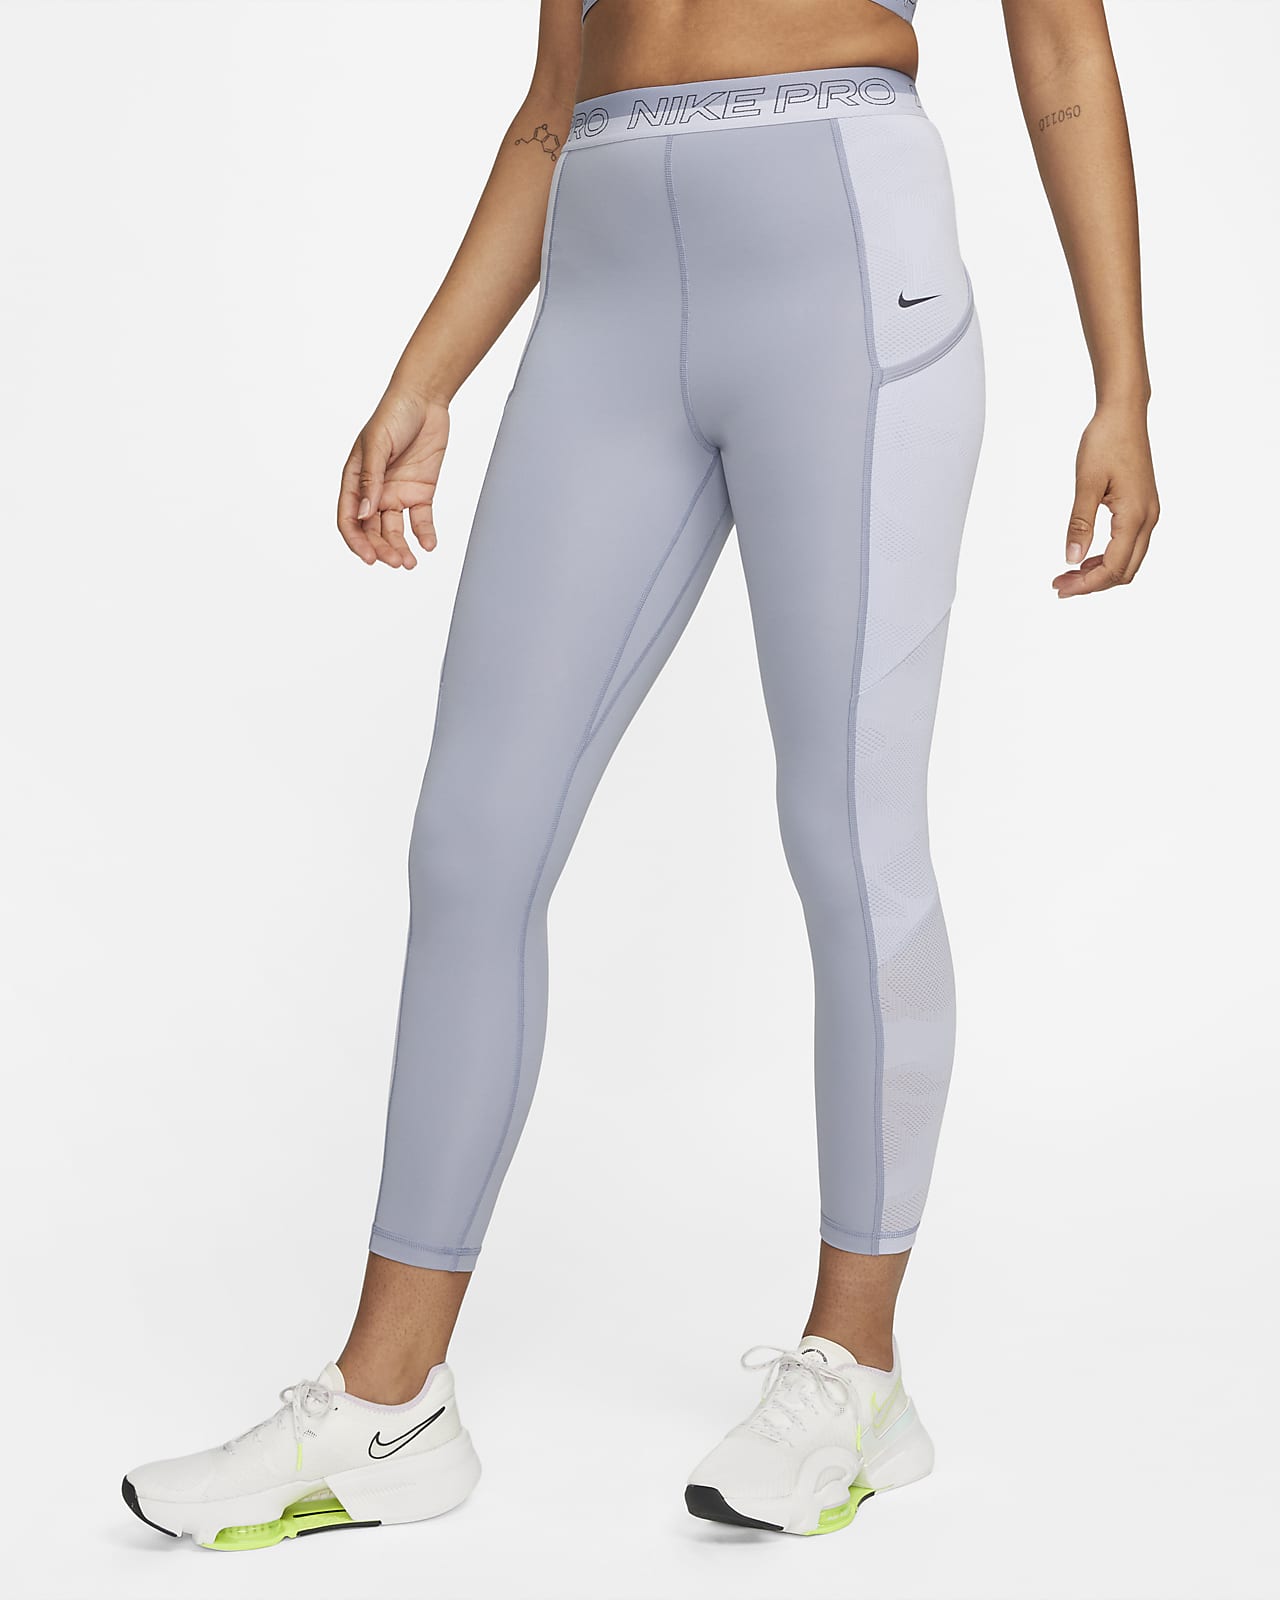 essay Opheldering selecteer Nike Pro Women's High-Waisted 7/8 Training Leggings with Pockets. Nike AT